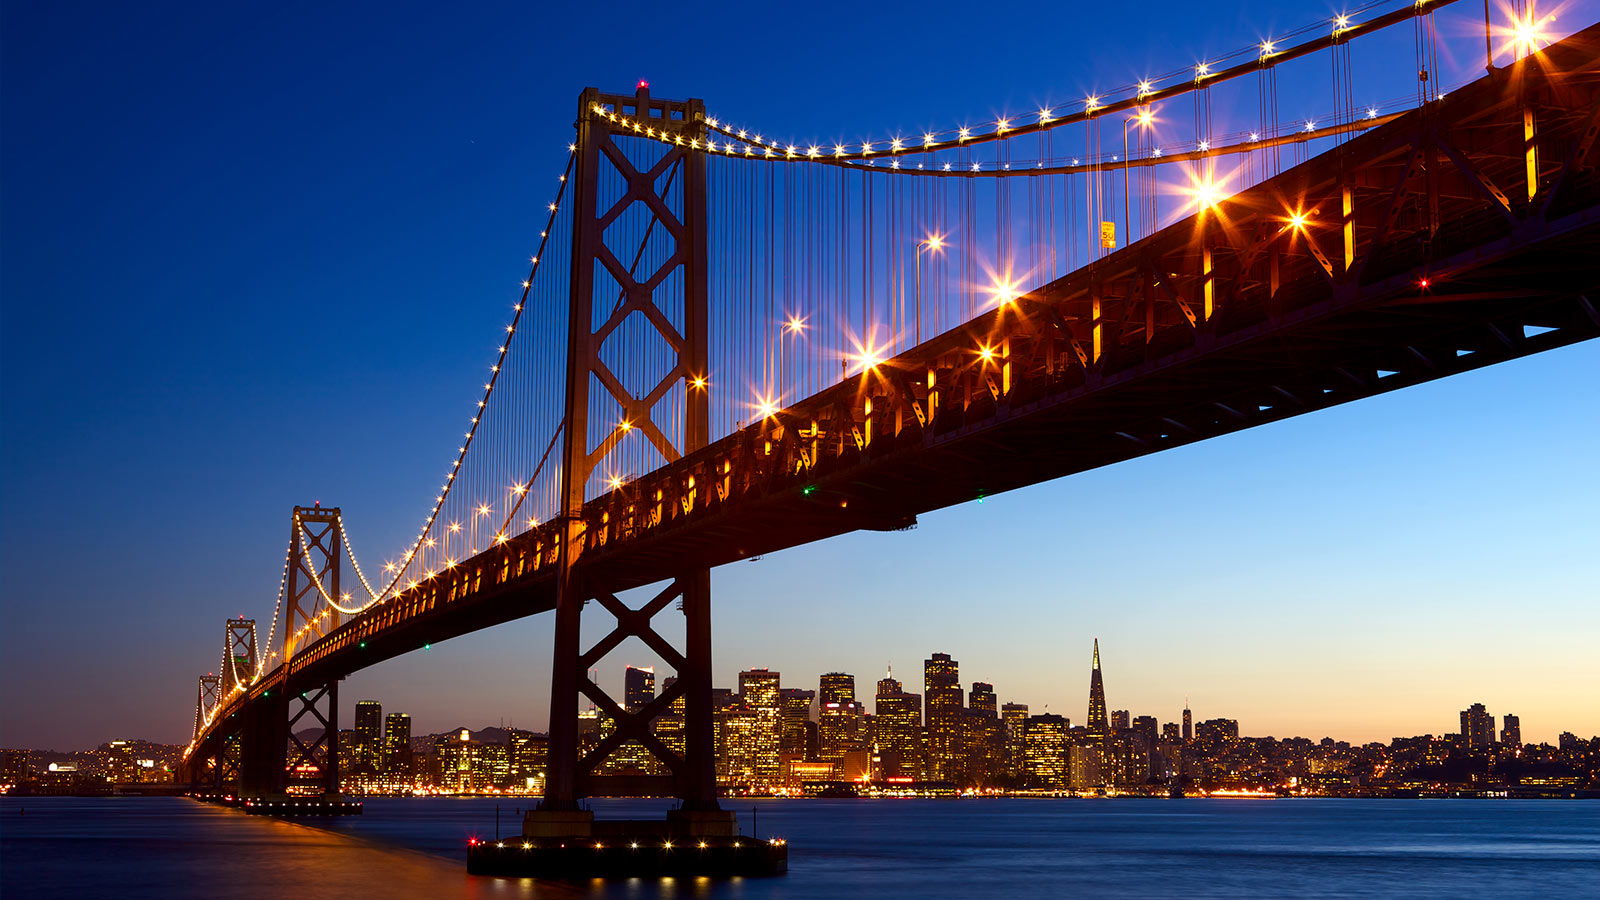 San Francisco Gift Guide: What to Buy Locals of the City by the Bay